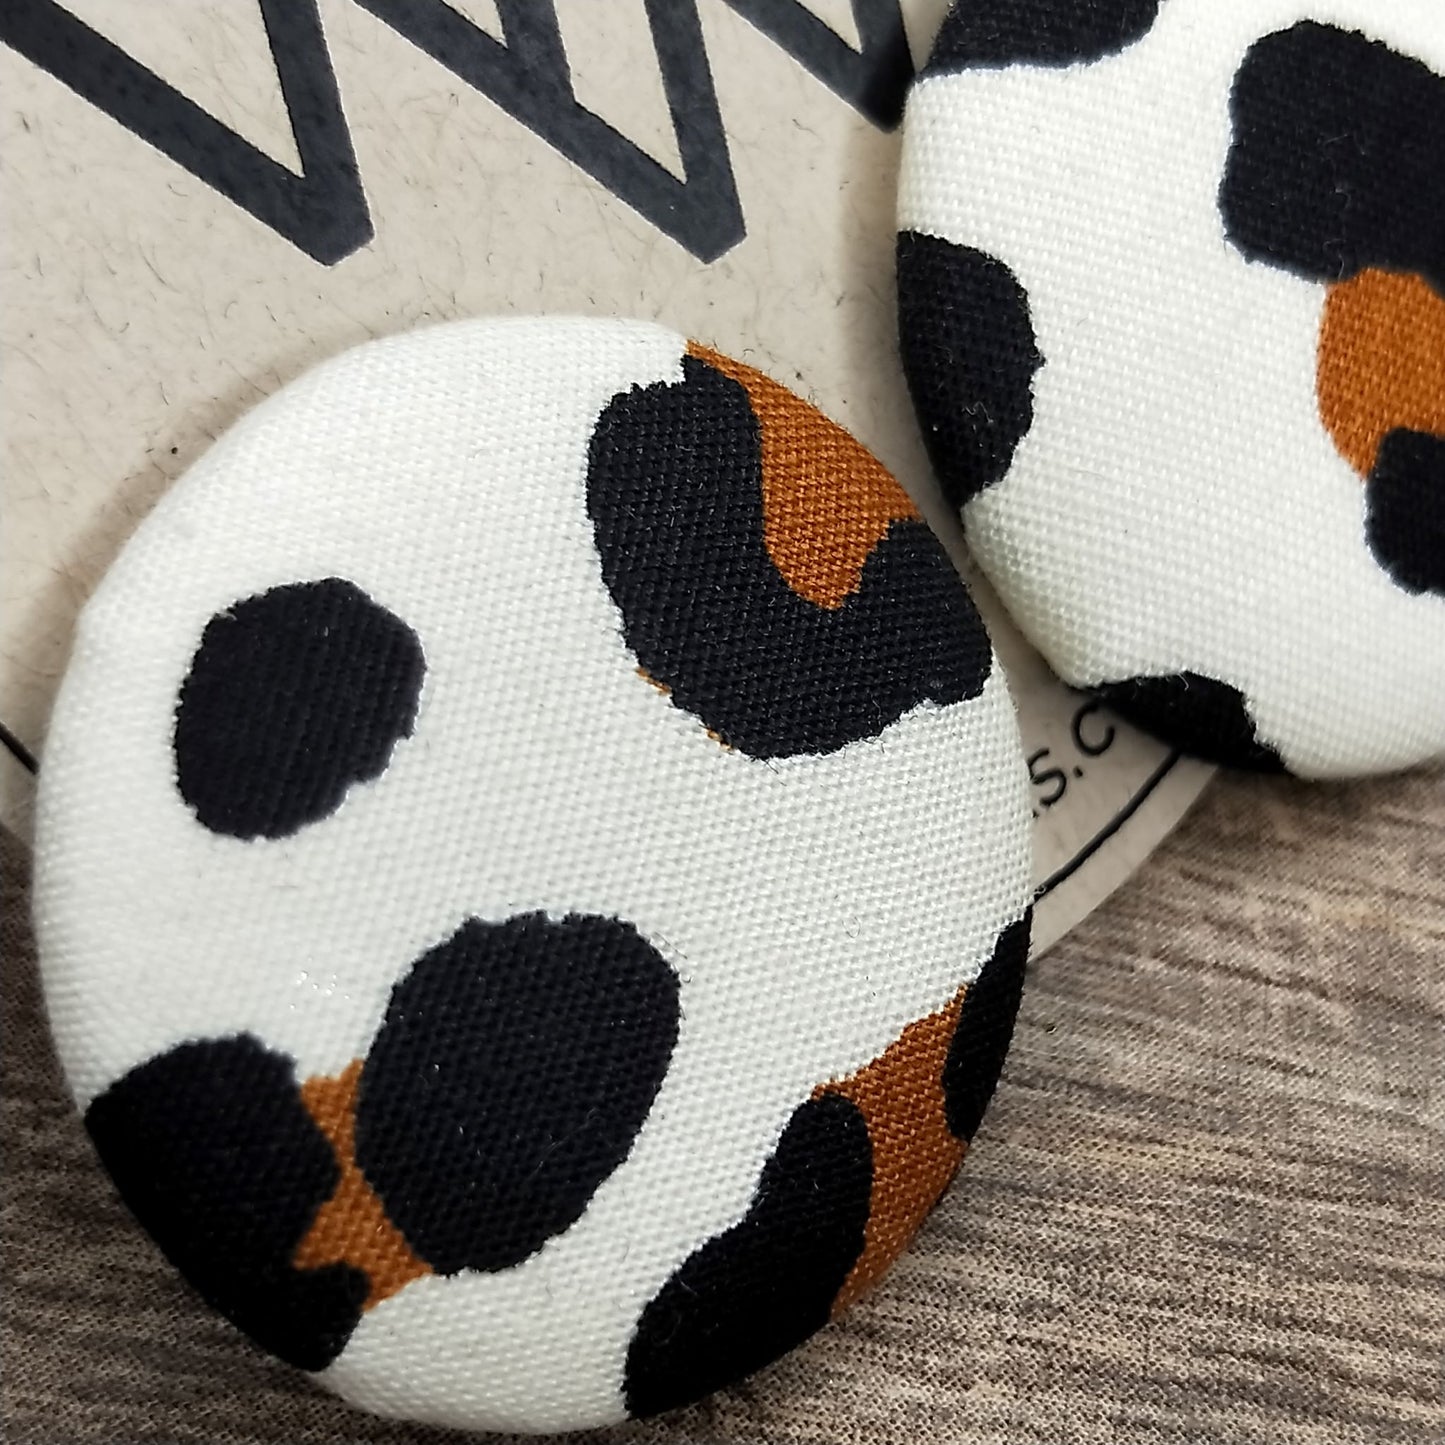 Wildears Fabric Covered Button Earrings Brown Black Leopard 27mm